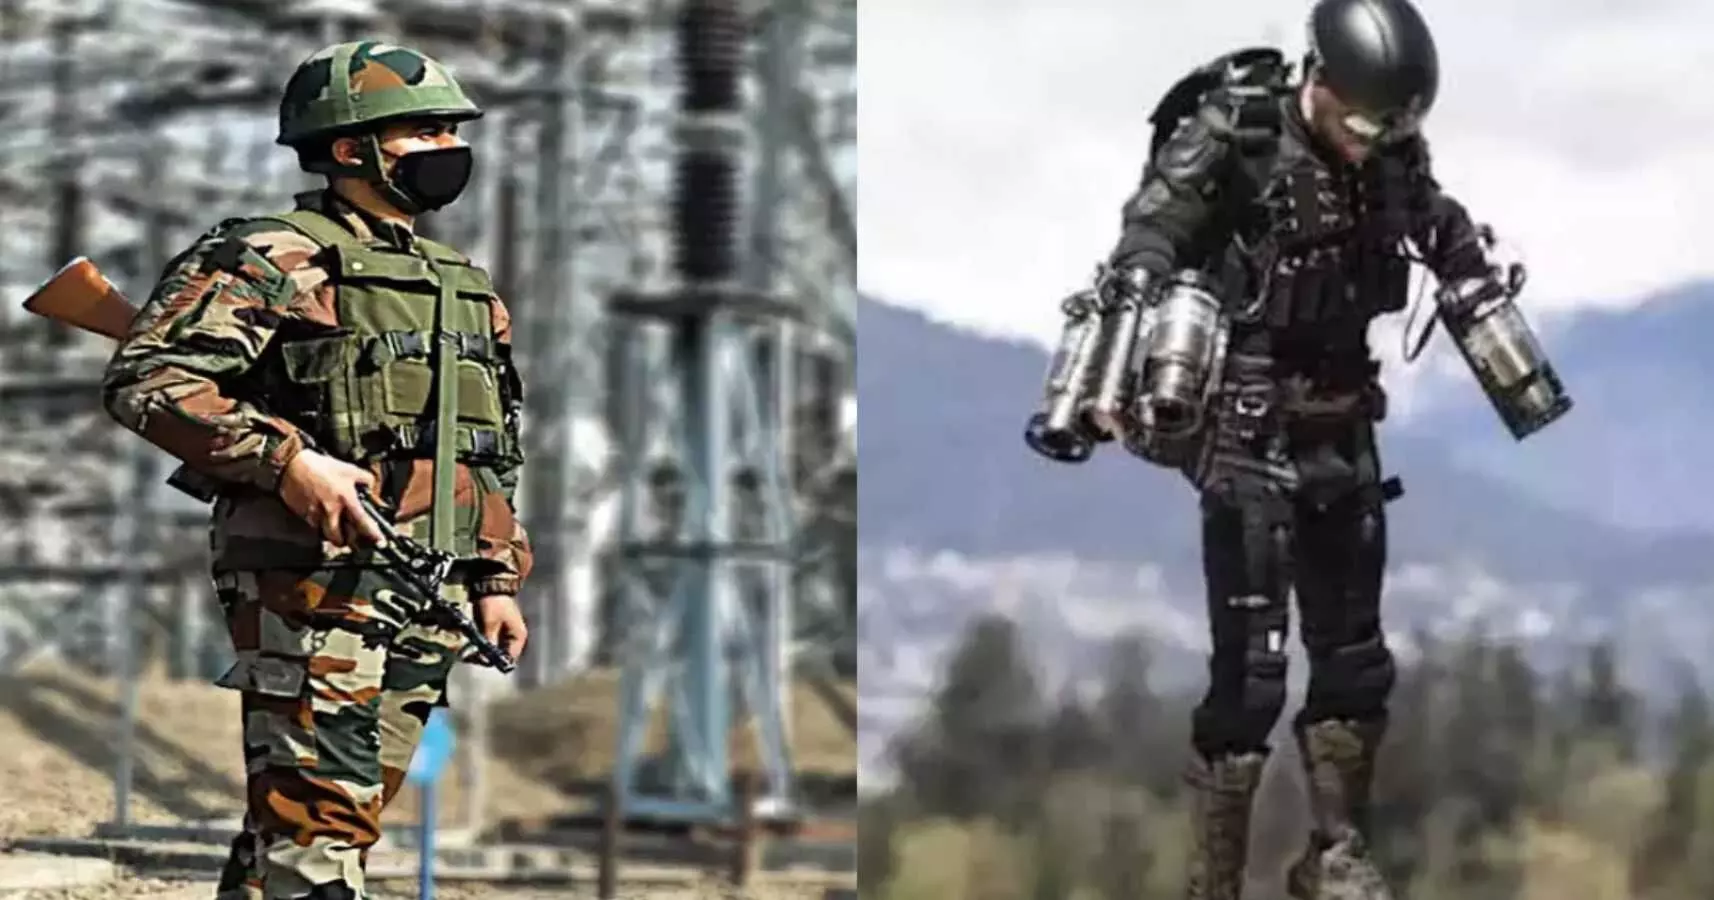 Indian Army Jetpack Suit: